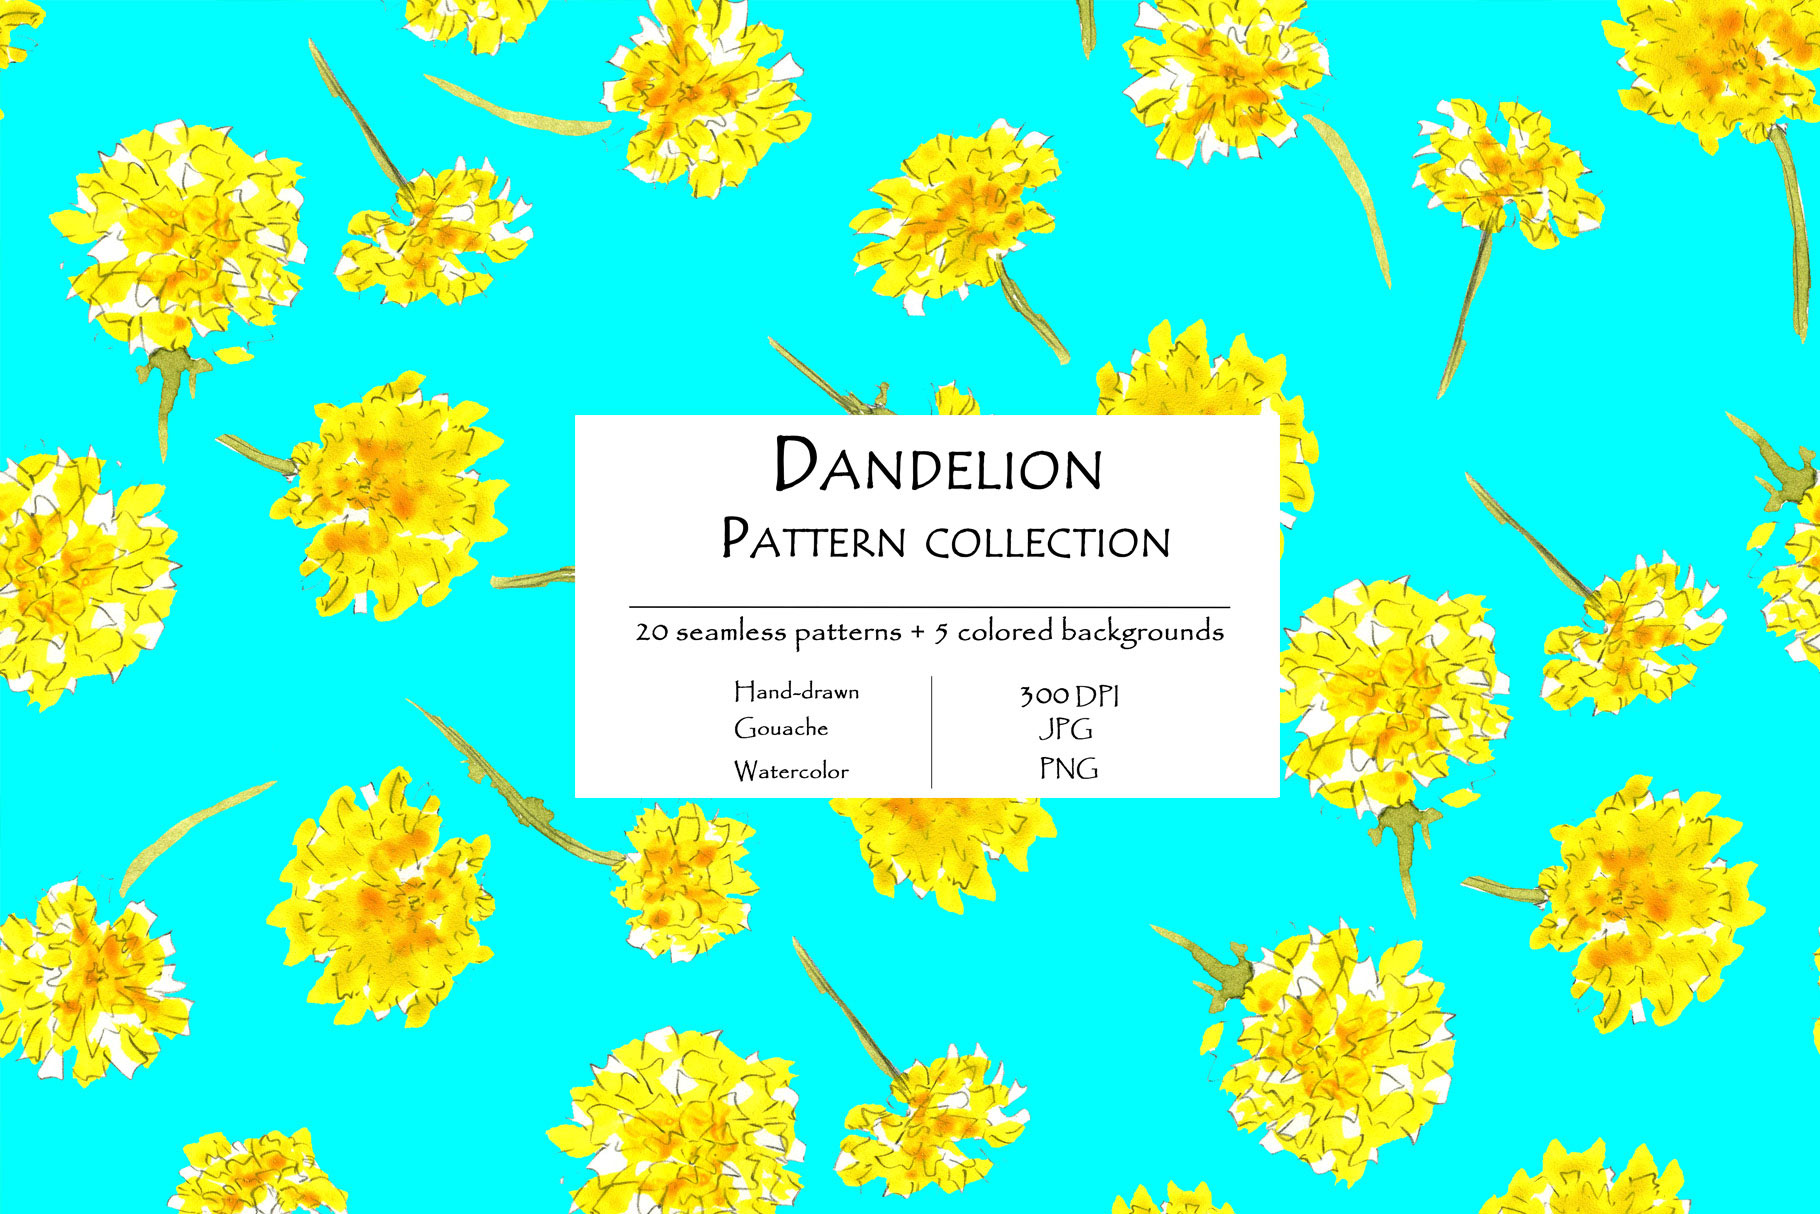 Dandelion Pattern Collection Of 20 Seamless Patterns And 5 Colored Background Facebook Image.